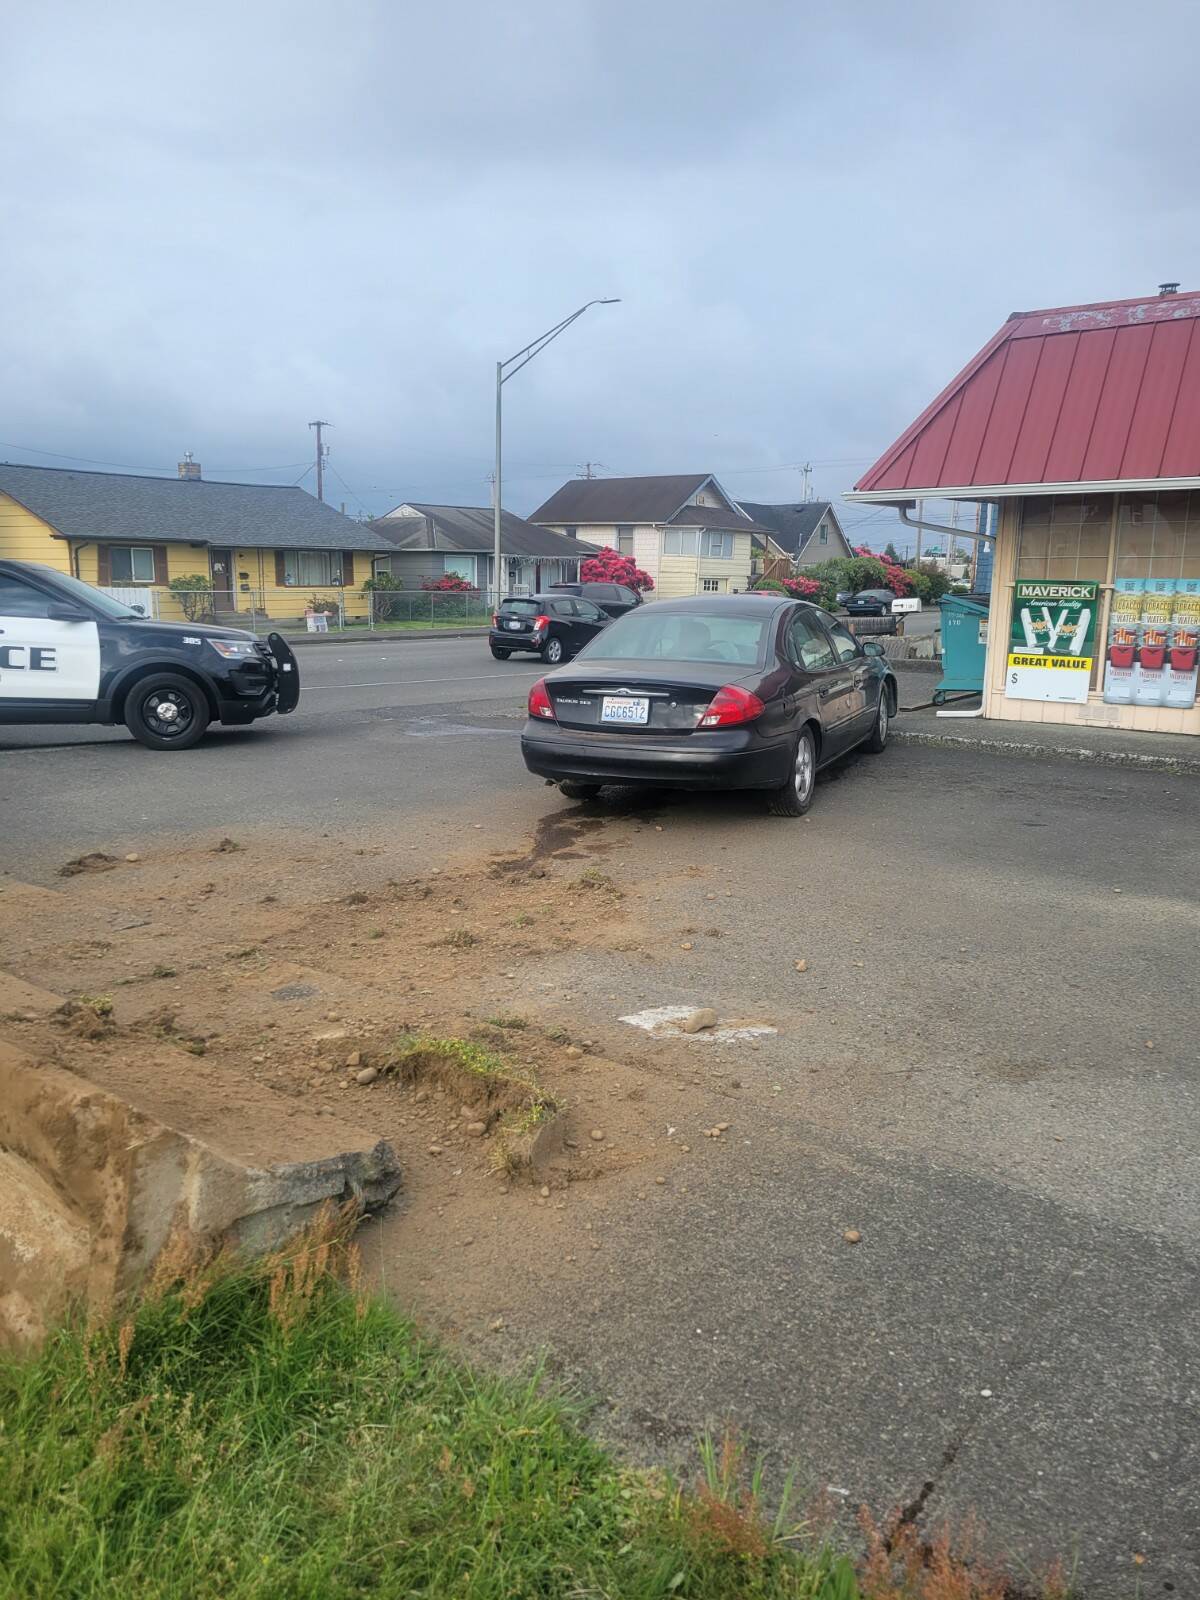 Courtesy photo / Aberdeen Police Department
Police are seeking a woman after she allegedly crashed a vehicle and left the scene in Aberdeen on Monday morning.